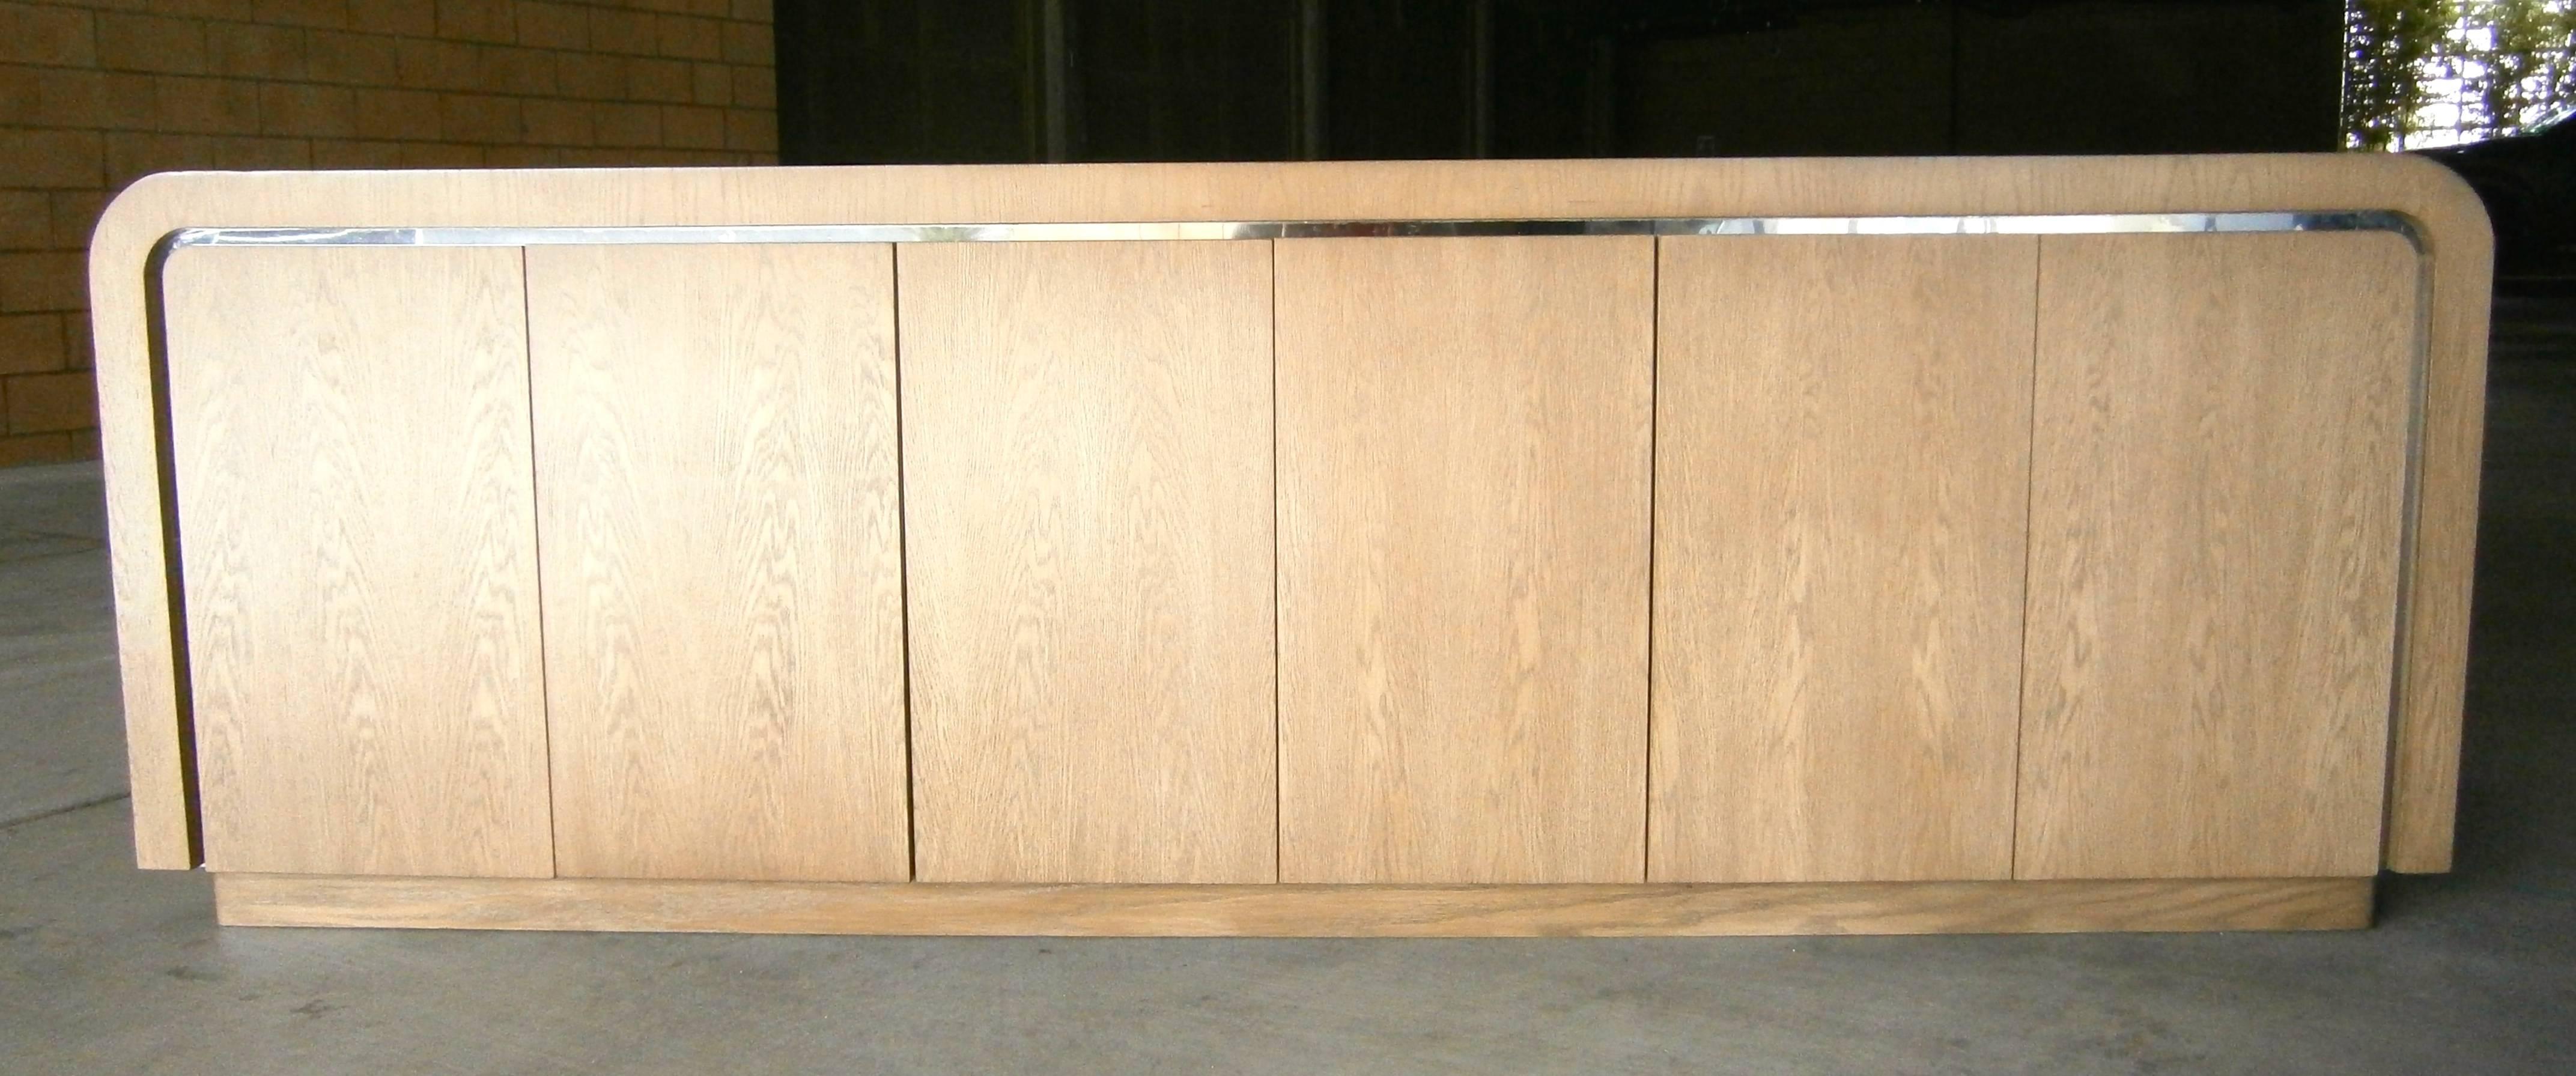 Mid-Century Modern Stained Oak Waterfall Credenza Cabinet Attributed to Steve Chase  C. 1980 For Sale